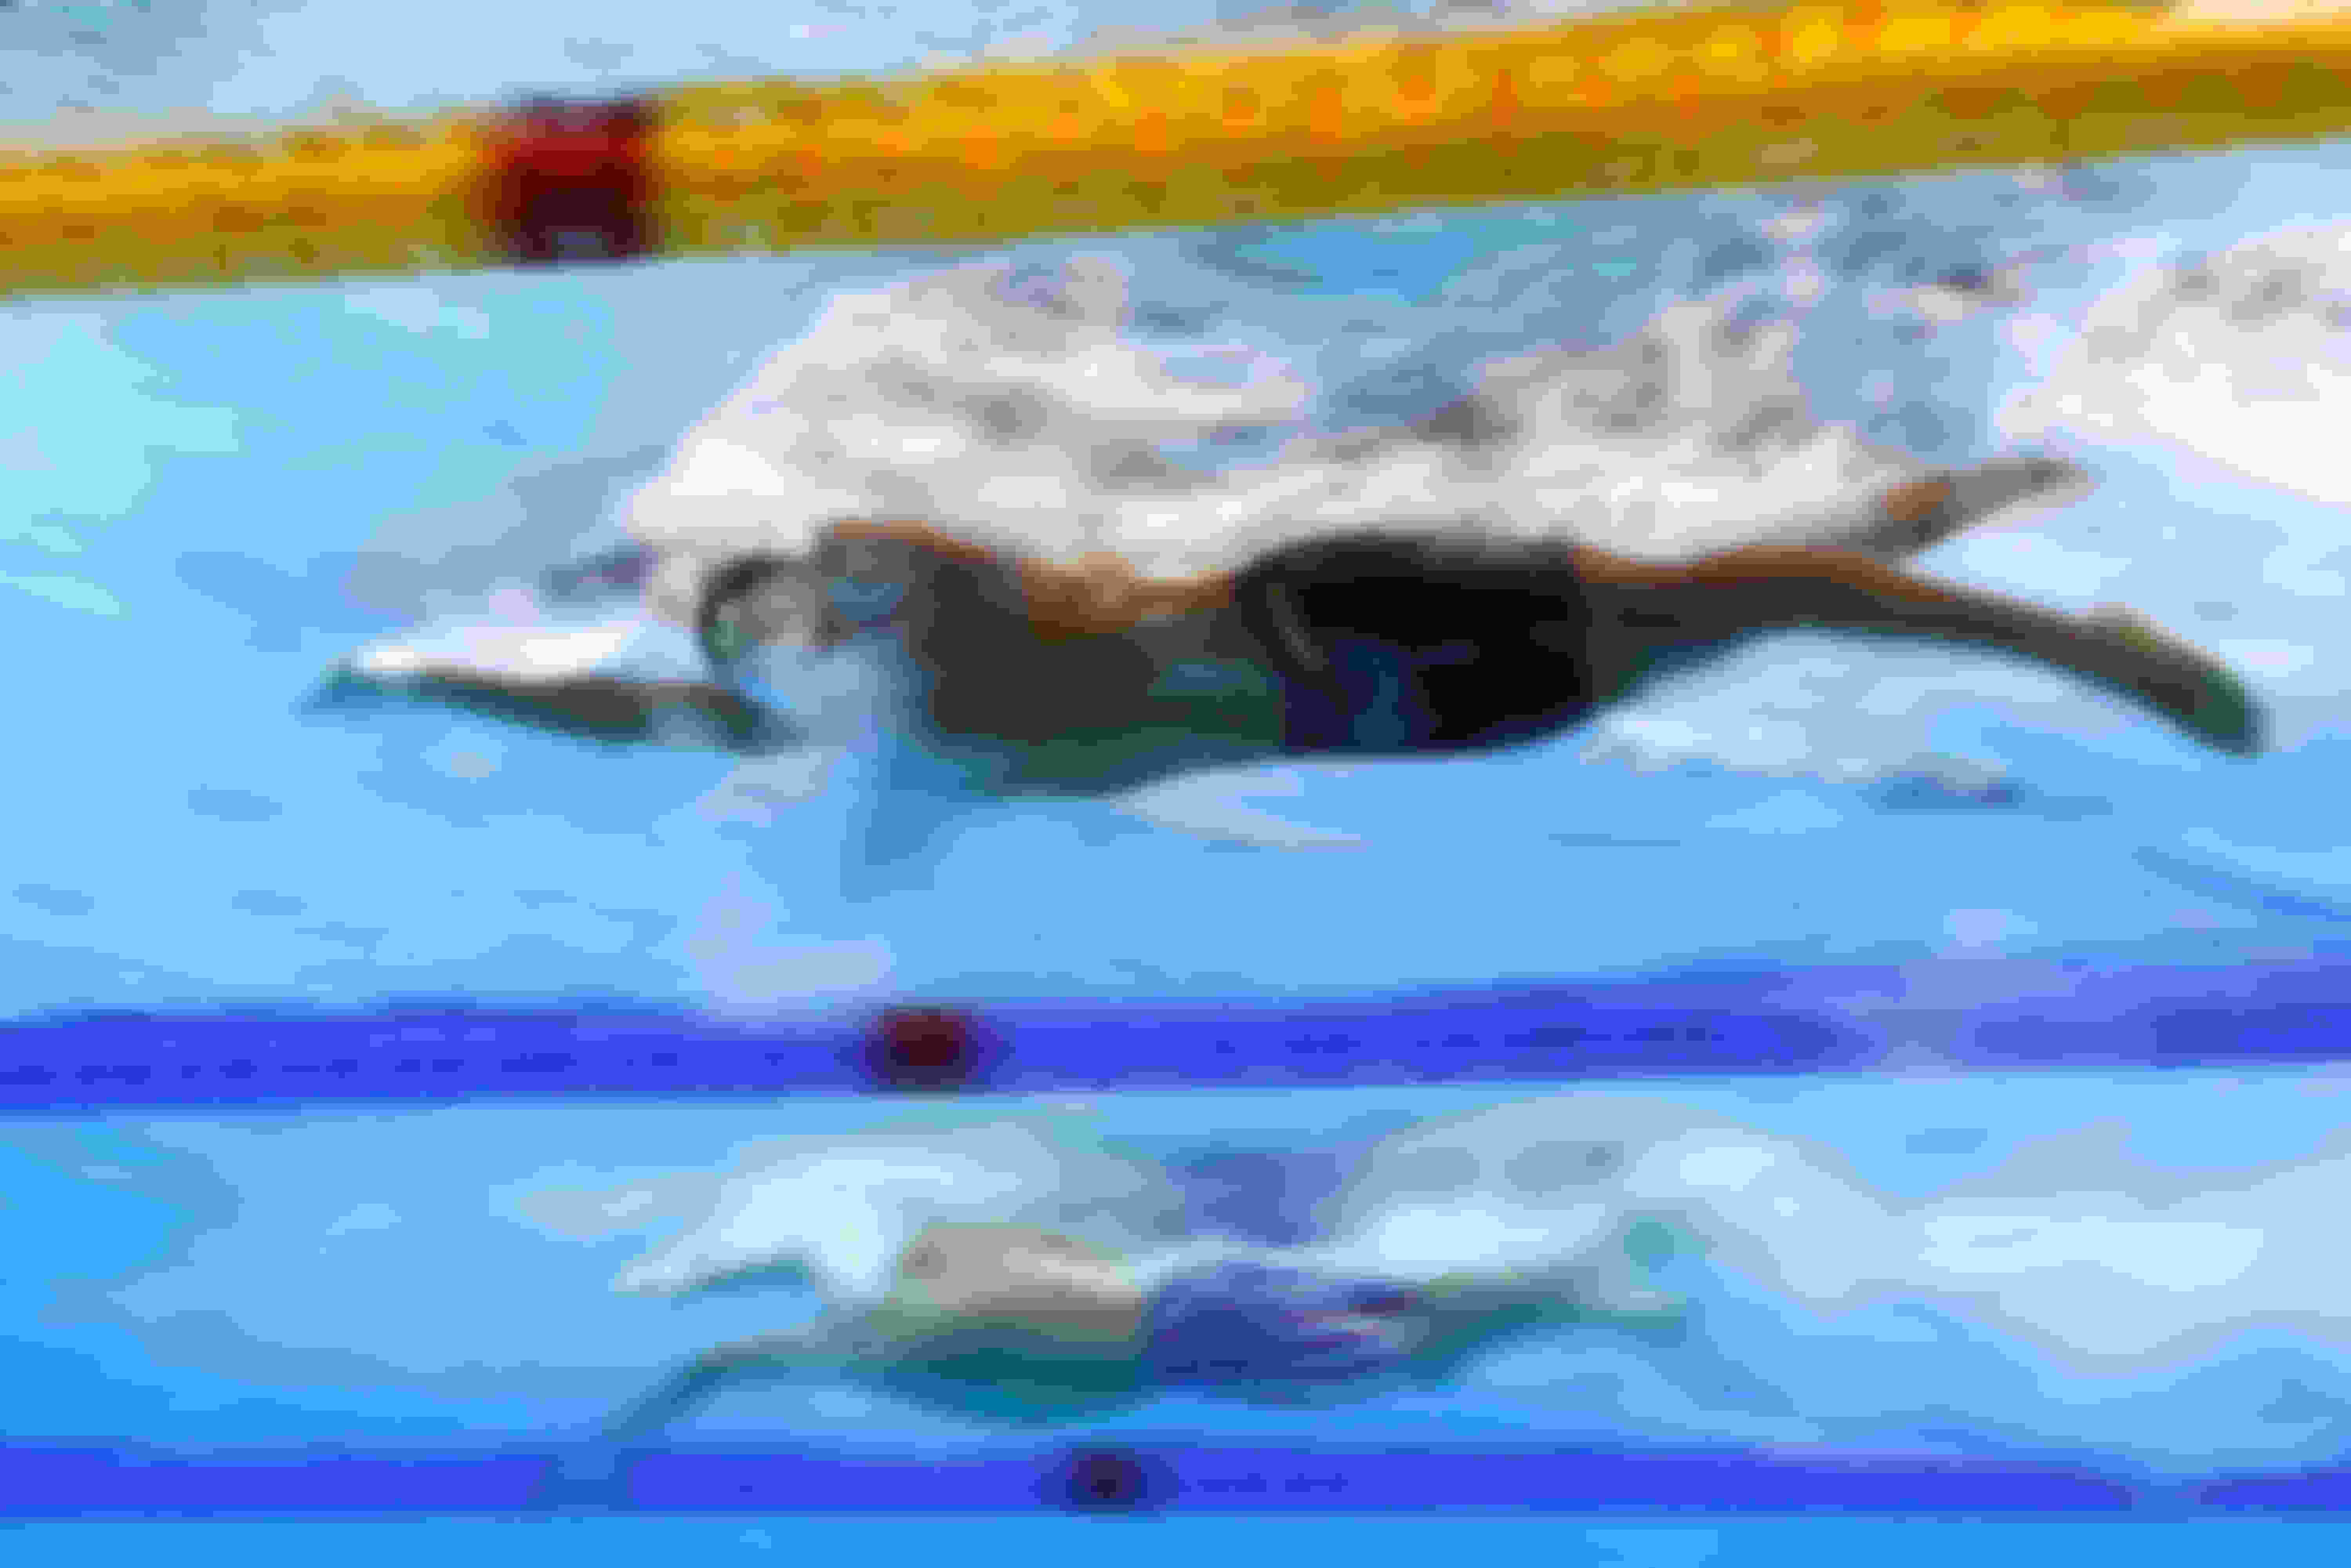 Ahmed Hafnaoui in action at the FINA Short Course World Championships in 2021.